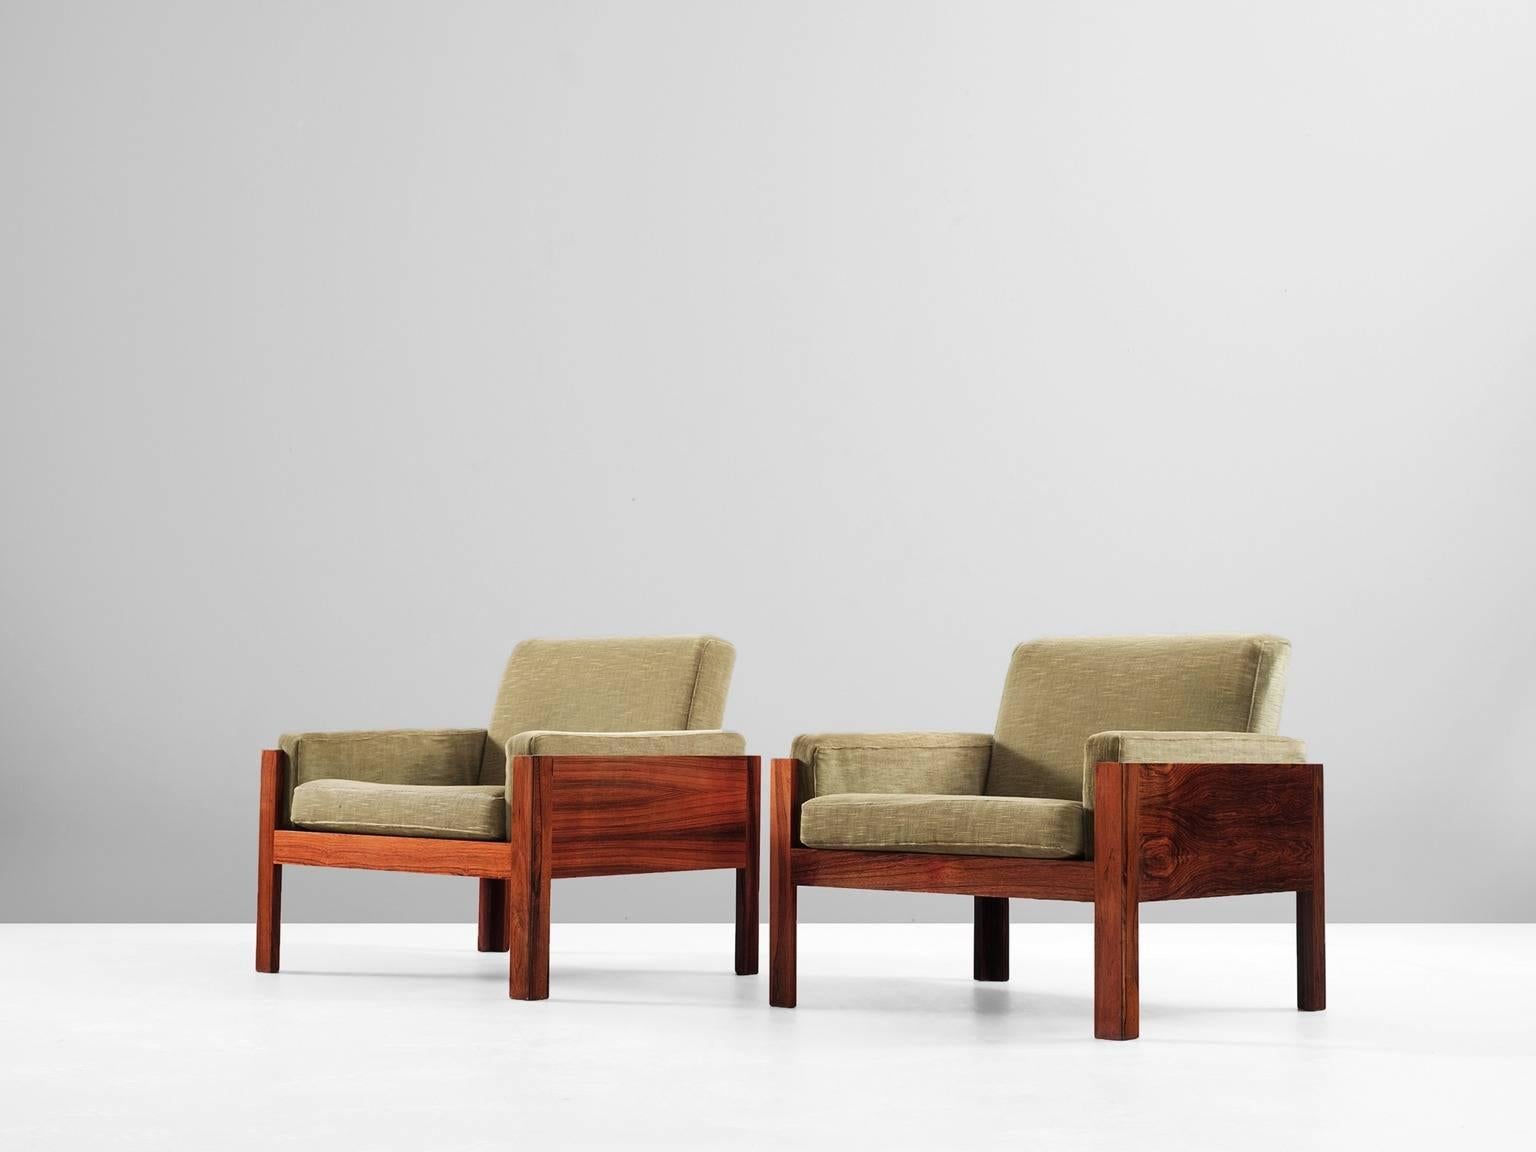 Pair of armchairs, in rosewood and fabric, scandinavia 1960s. 

Set of lounge chairs with a cubic and modern design. These chairs get a more open character by the four legs. The grain of the rosewood is beautiful visible on the wooden frame.